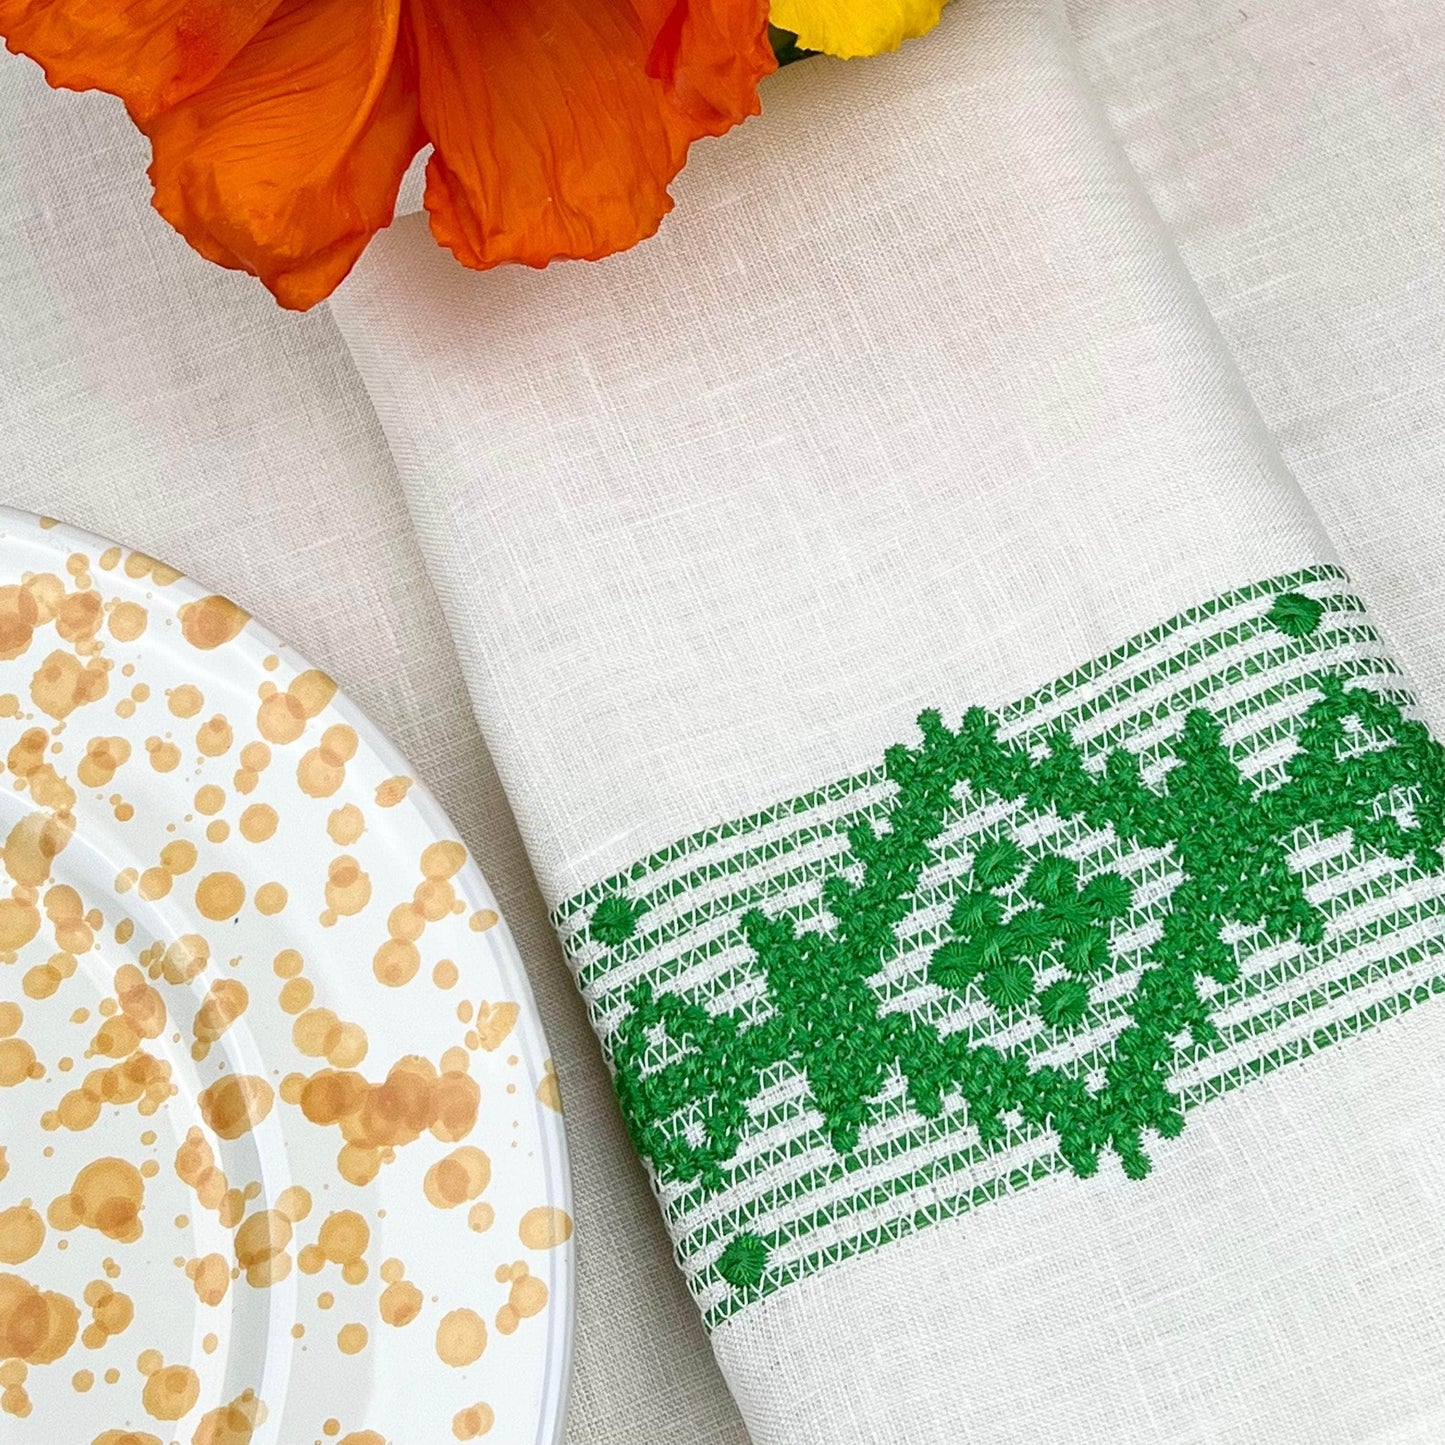 The Folklore Napkin & Placemat Set in Ivory & Shamrock Green | One Napkin and One Placemat